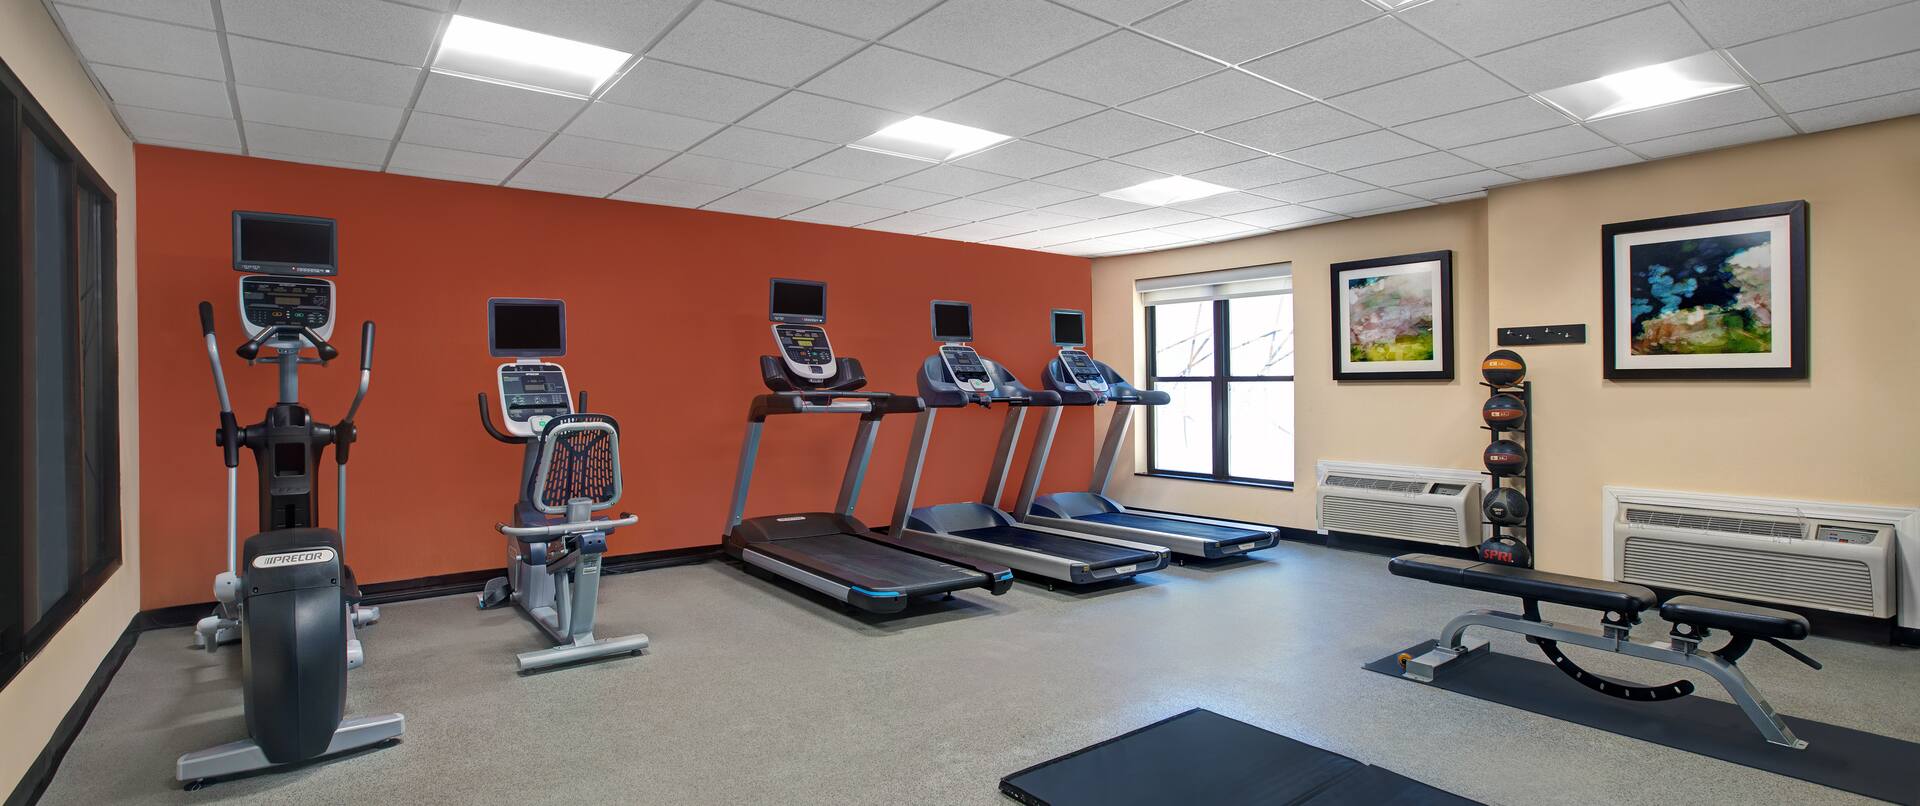 fitness center with various workout machines